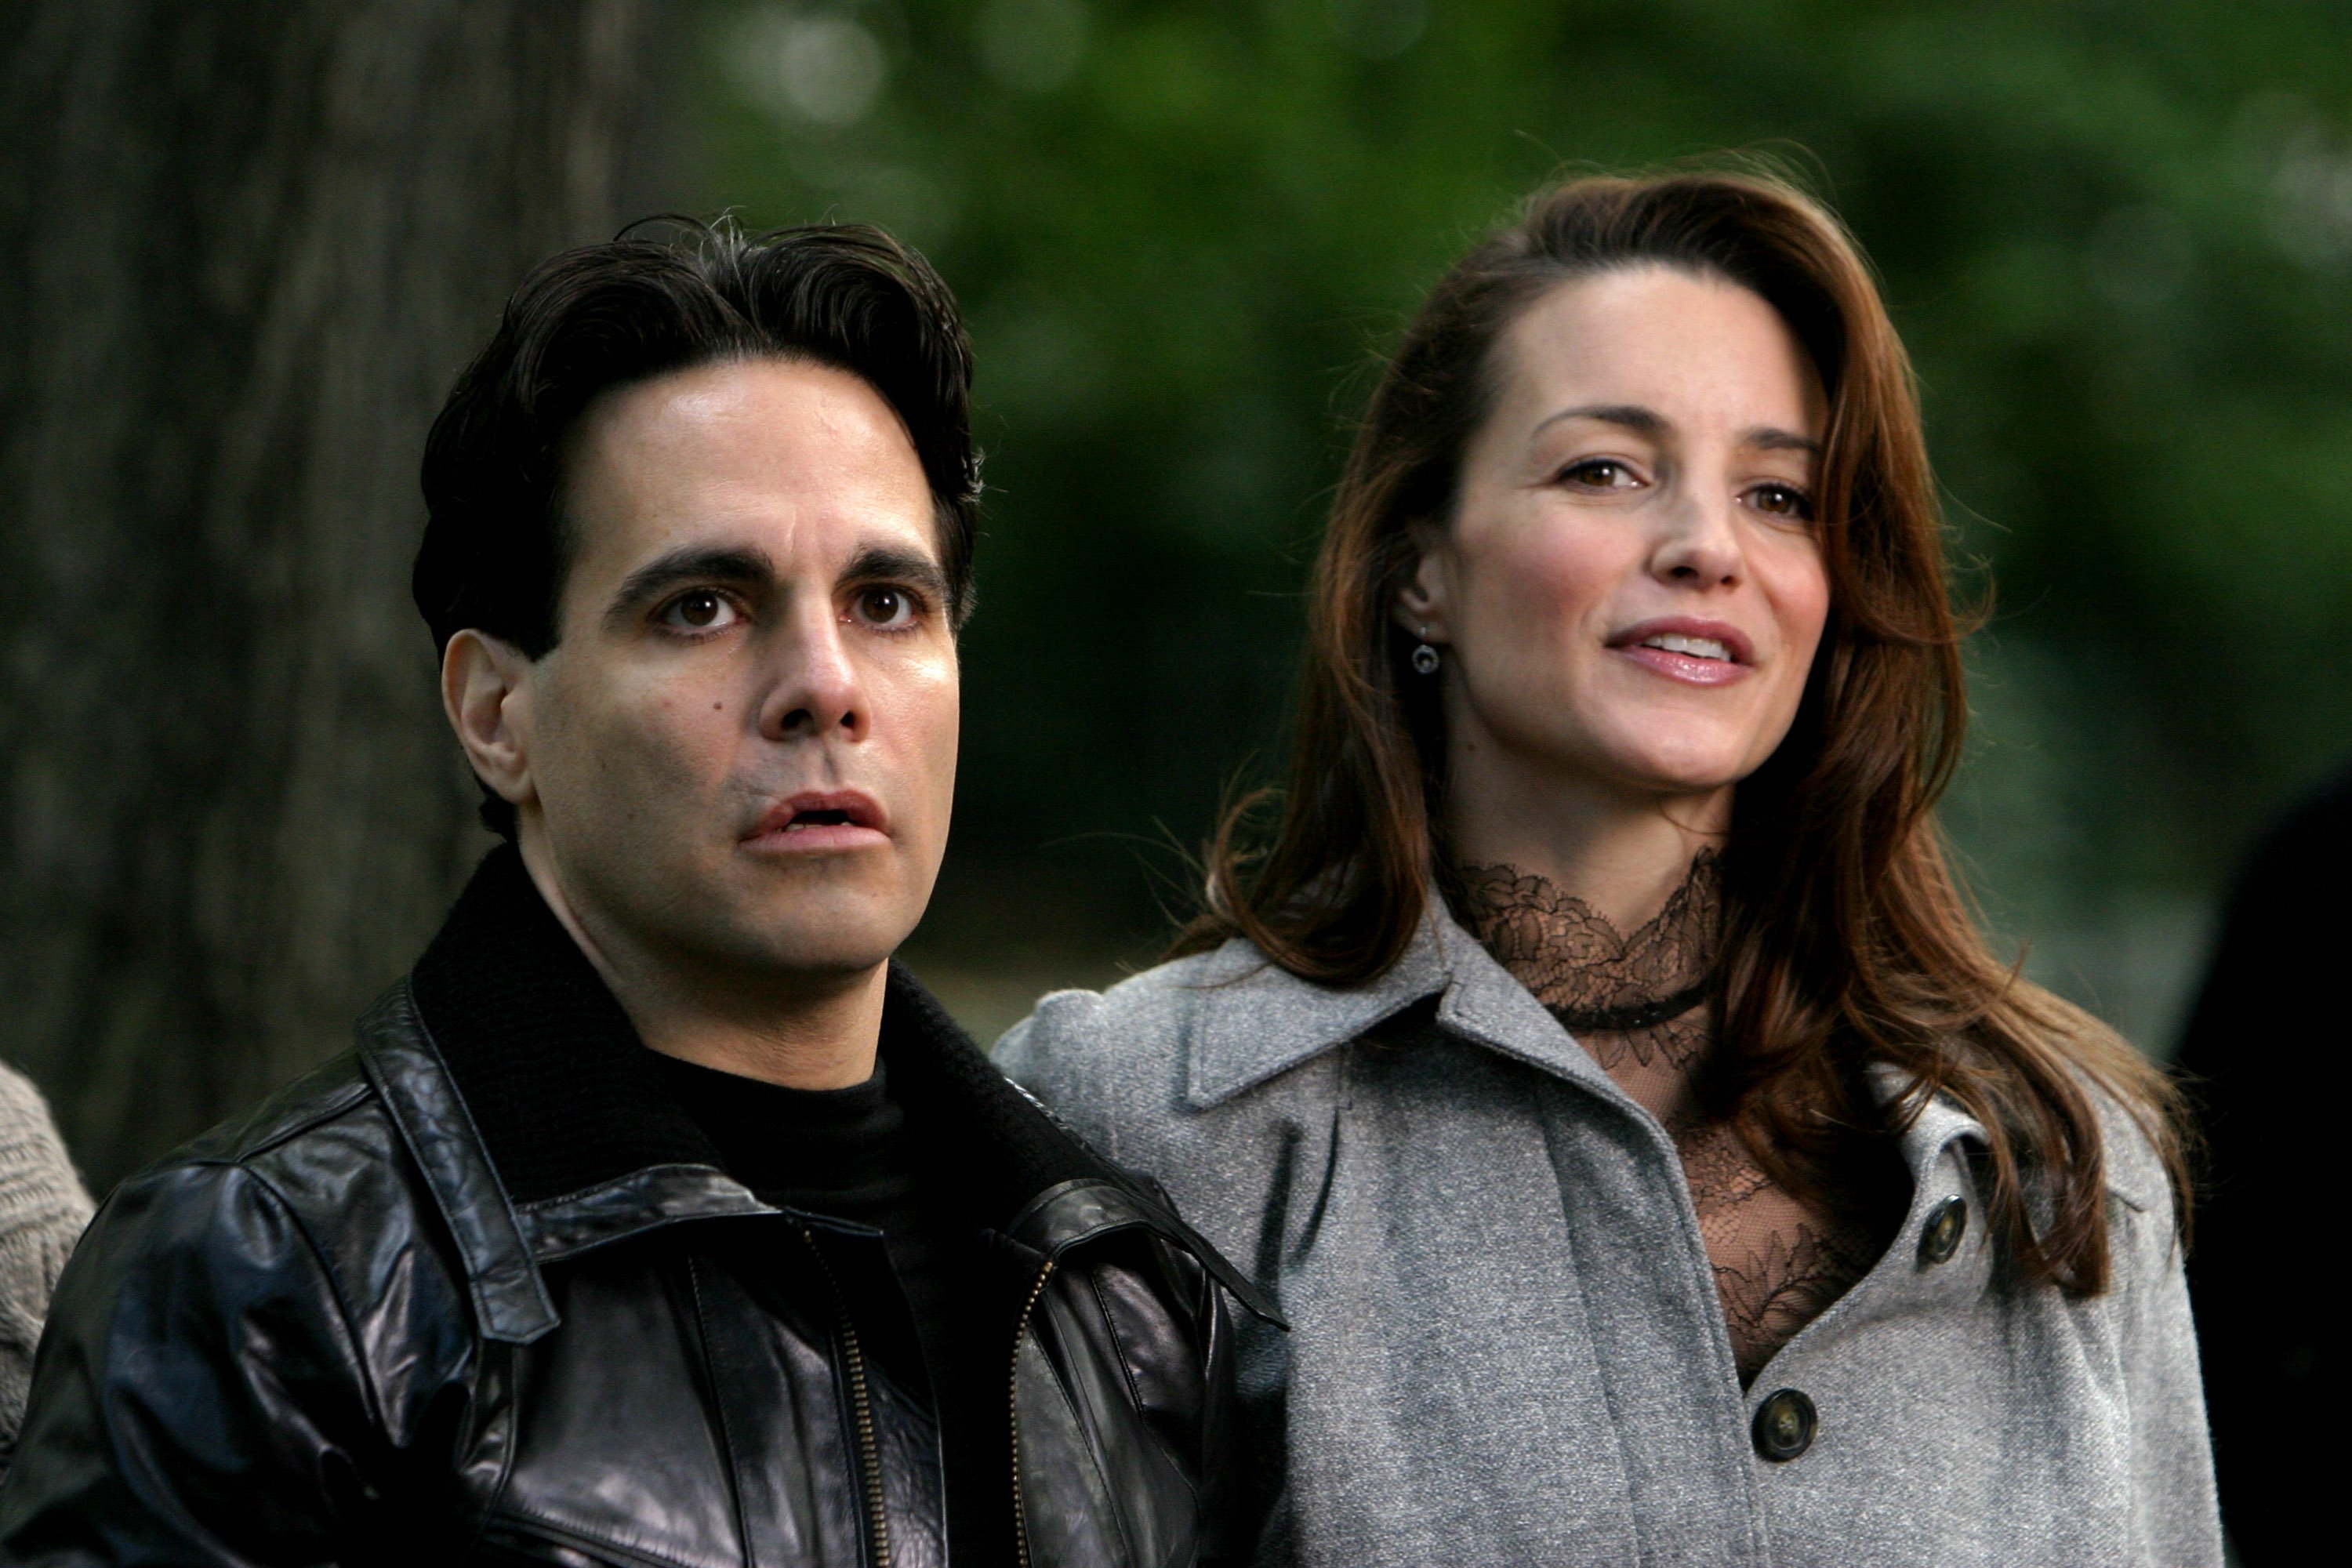 Kristin Davis as Charlotte York and Mario Cantone as Anthony Marantino sit together in Central Park during the filming of 'Sex and the City'